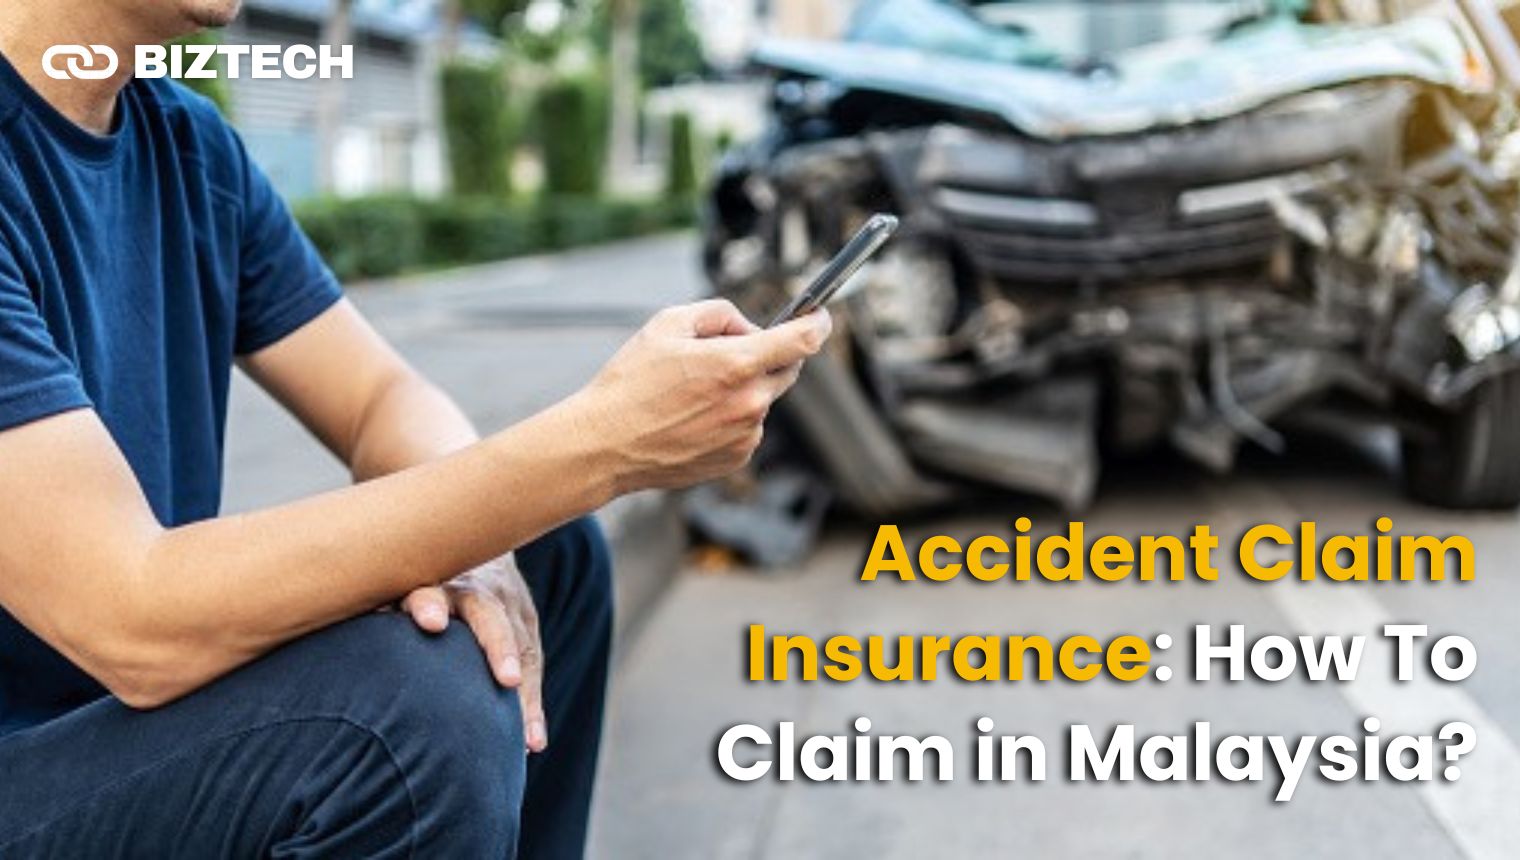 Accident Claim Insurance How To Claim in Malaysia